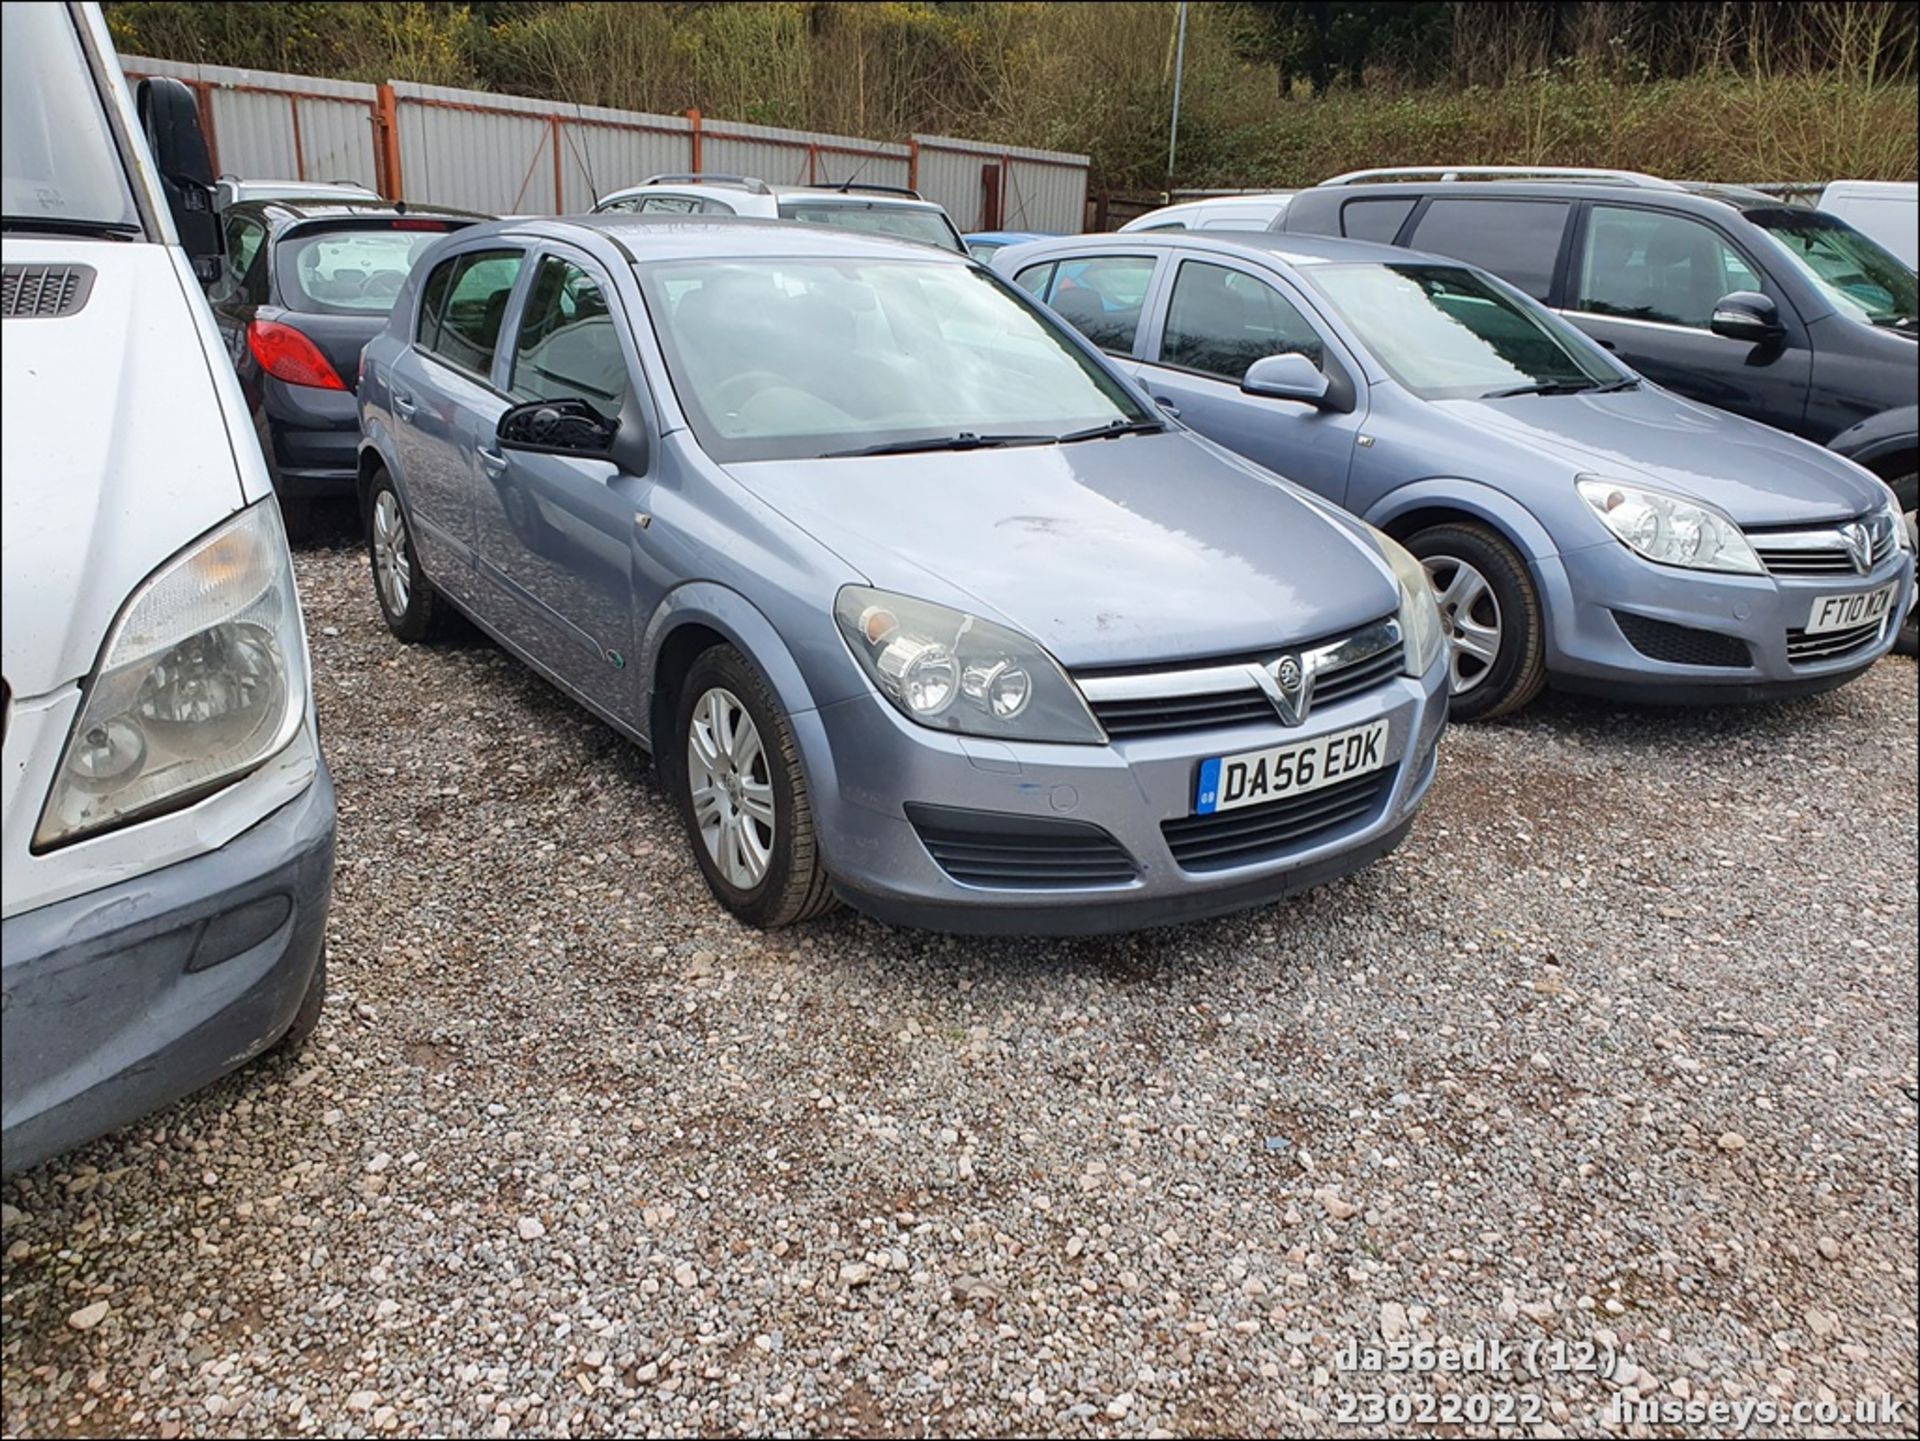 06/56 VAUXHALL ASTRA ACTIVE - 1598cc 5dr Hatchback (Silver) - Image 13 of 42